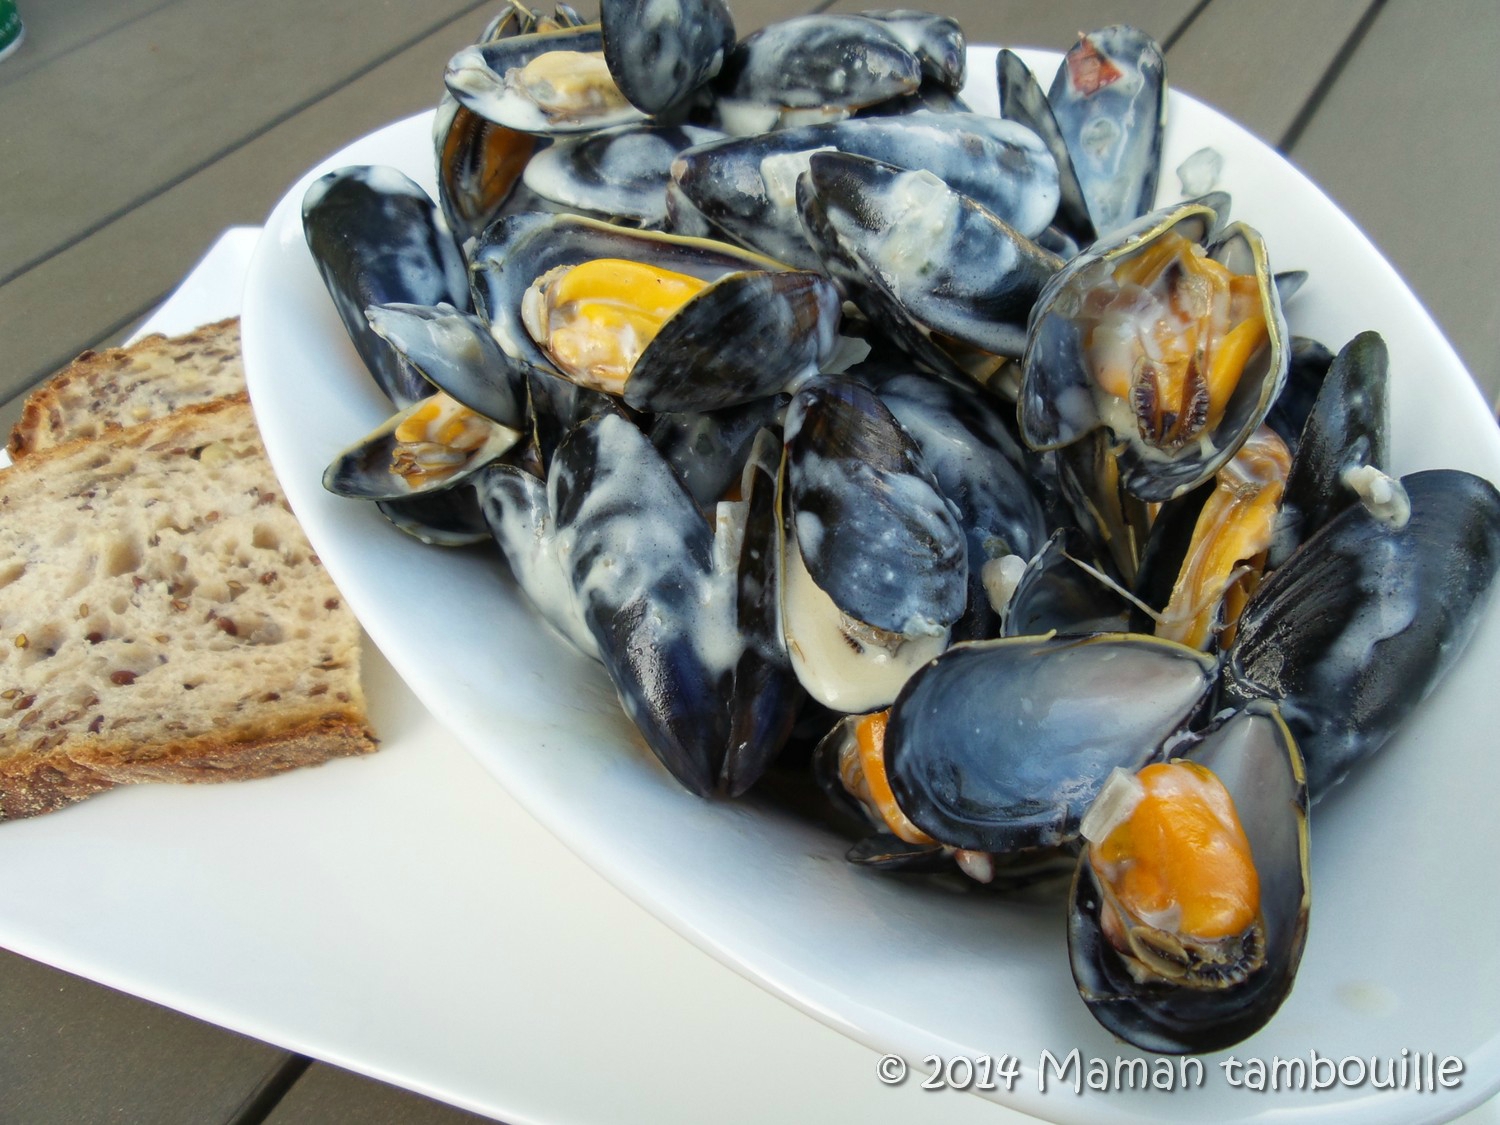 You are currently viewing Moules au roquefort